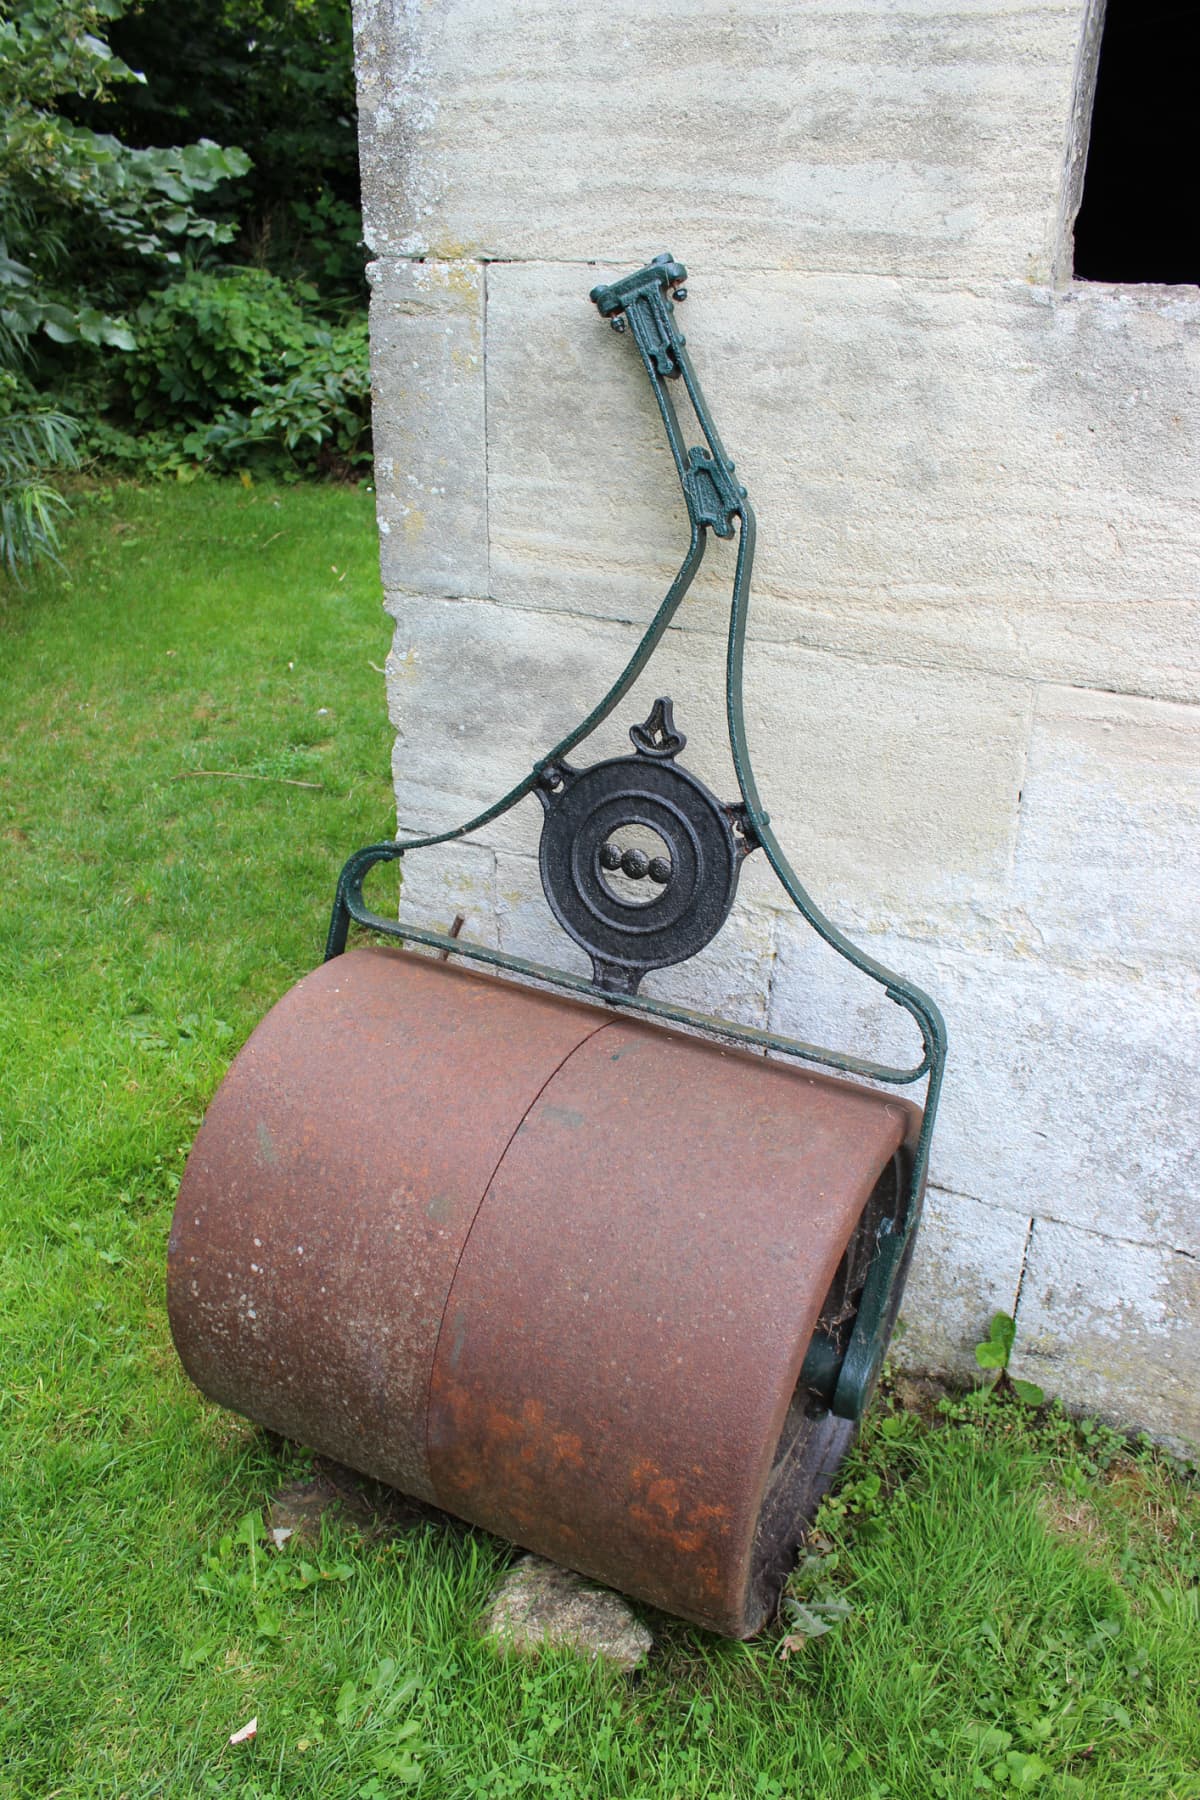 Rusty lawn roller with ornate handle